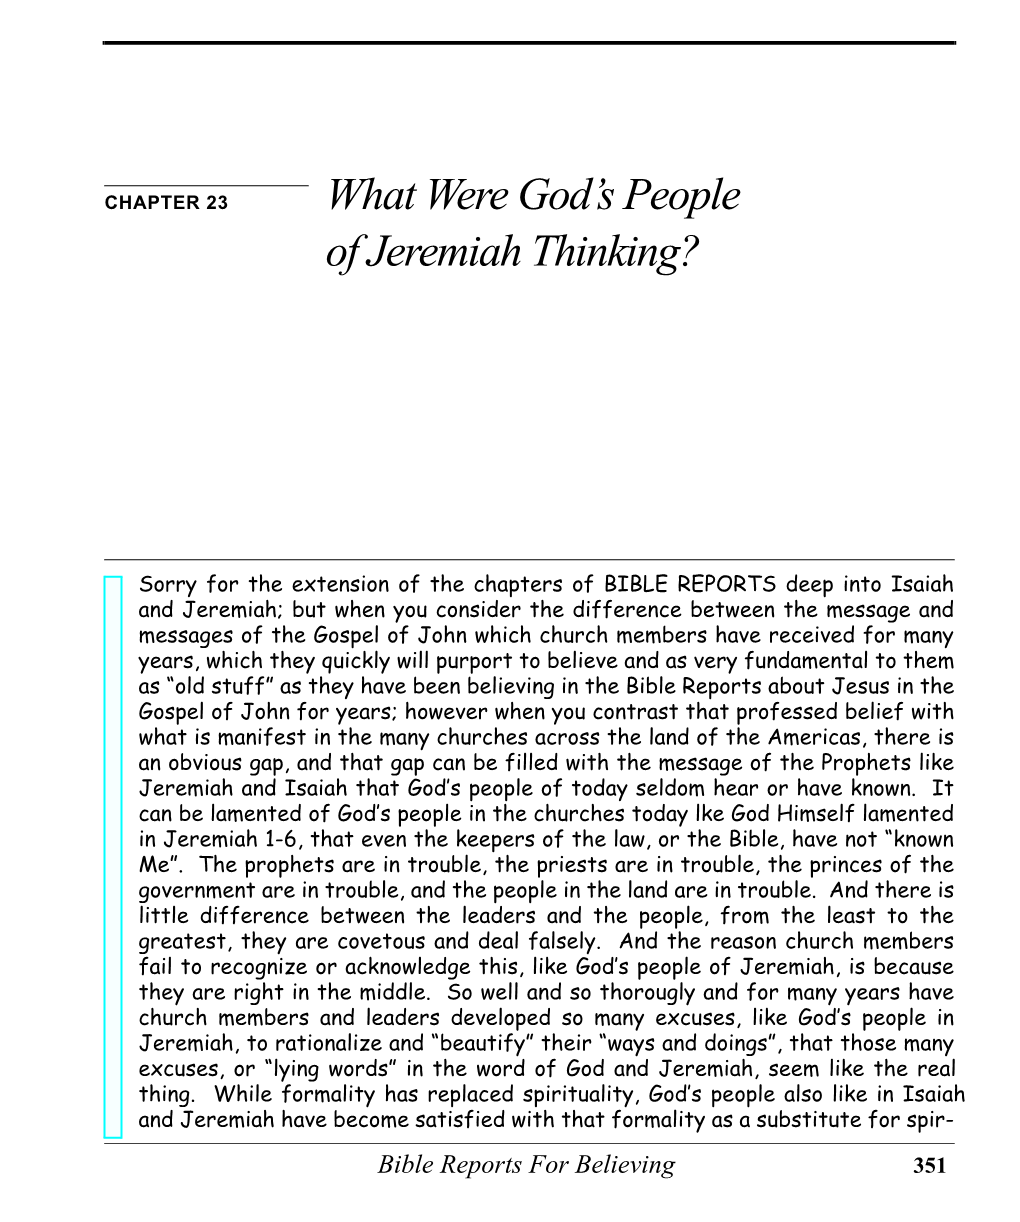 What Were God's People of Jeremiah Thinking?